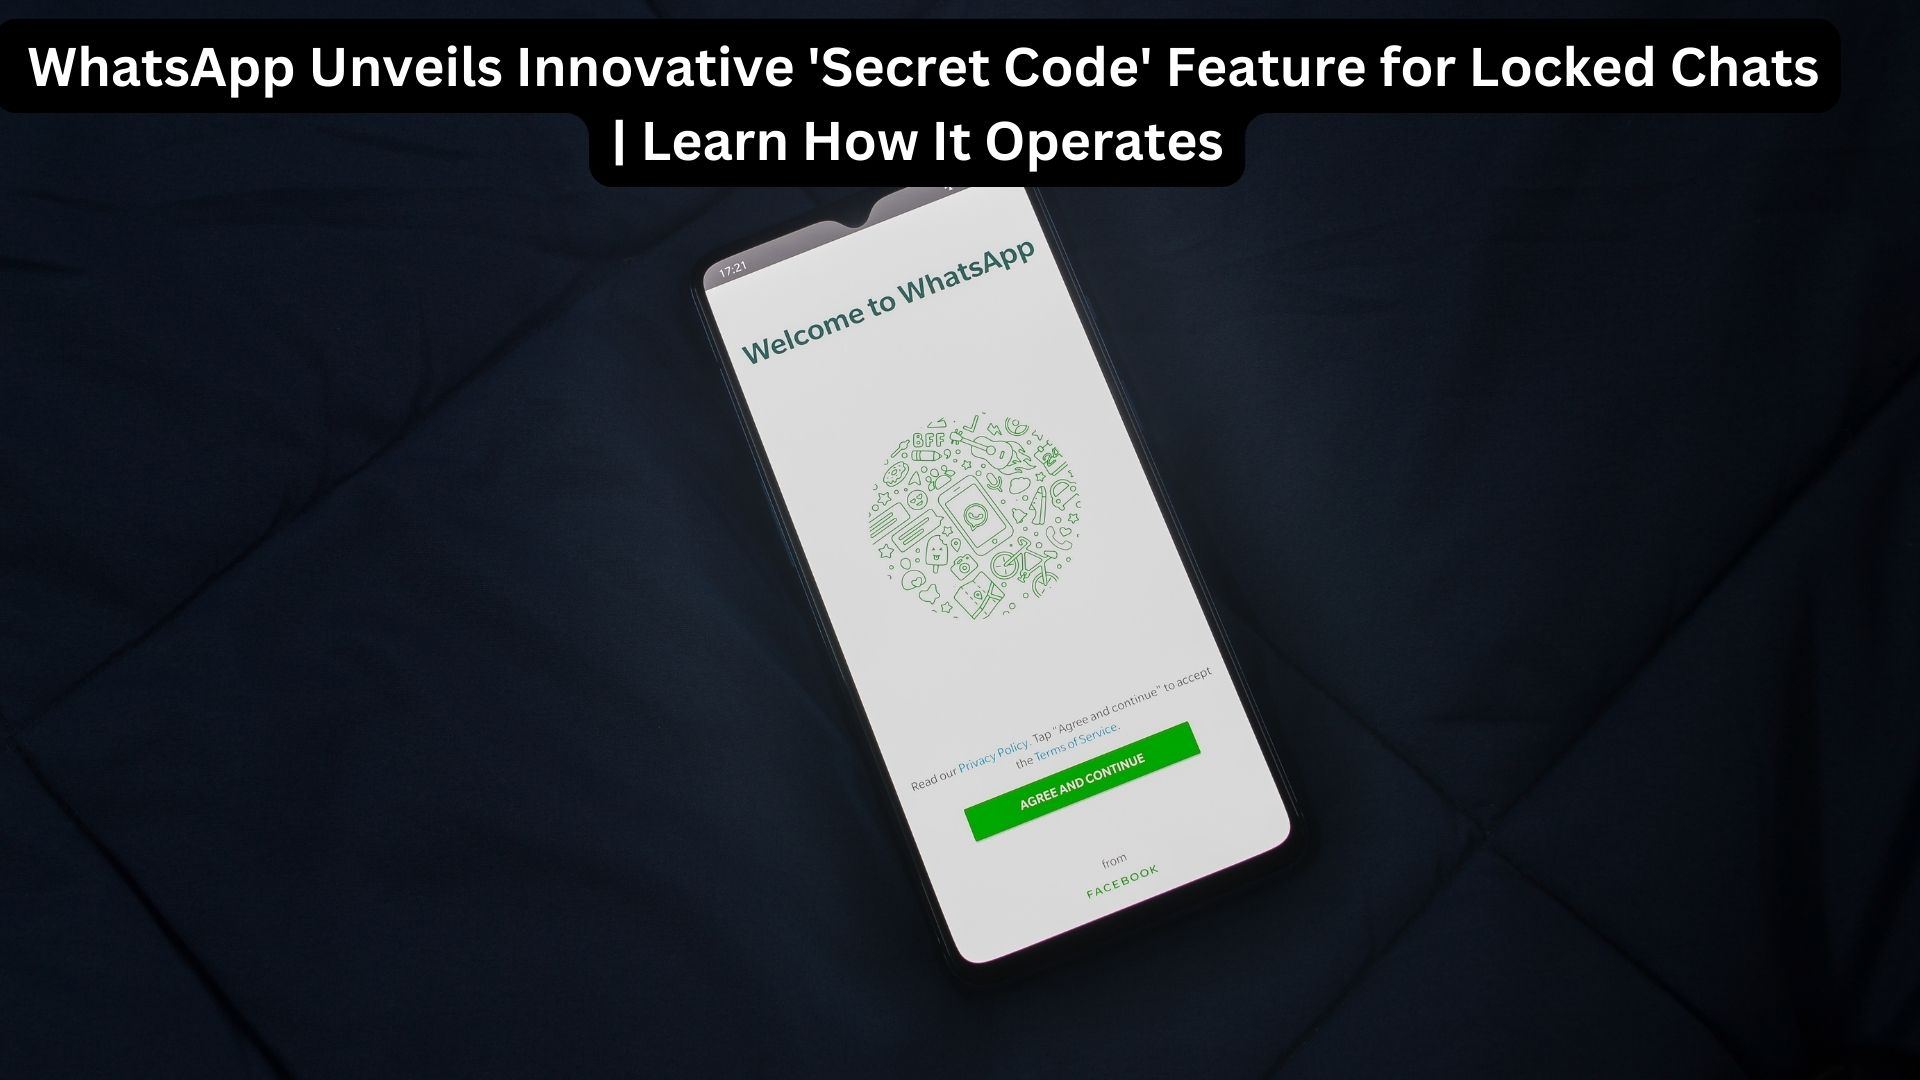 WhatsApp Unveils Innovative 'Secret Code' Feature for Locked Chats | Learn How It Operates